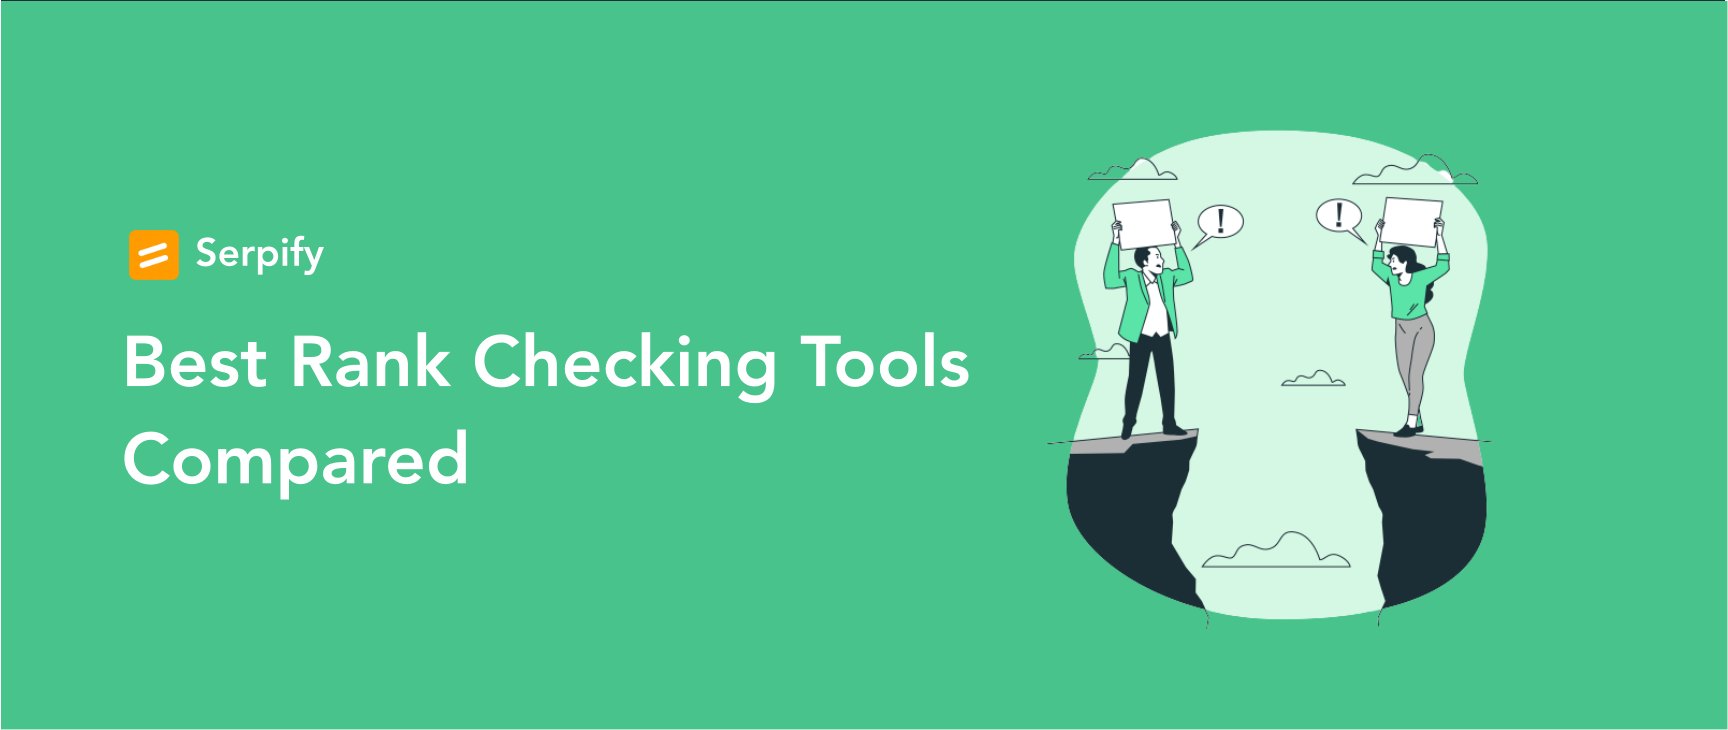 Best Rank Checking Tools